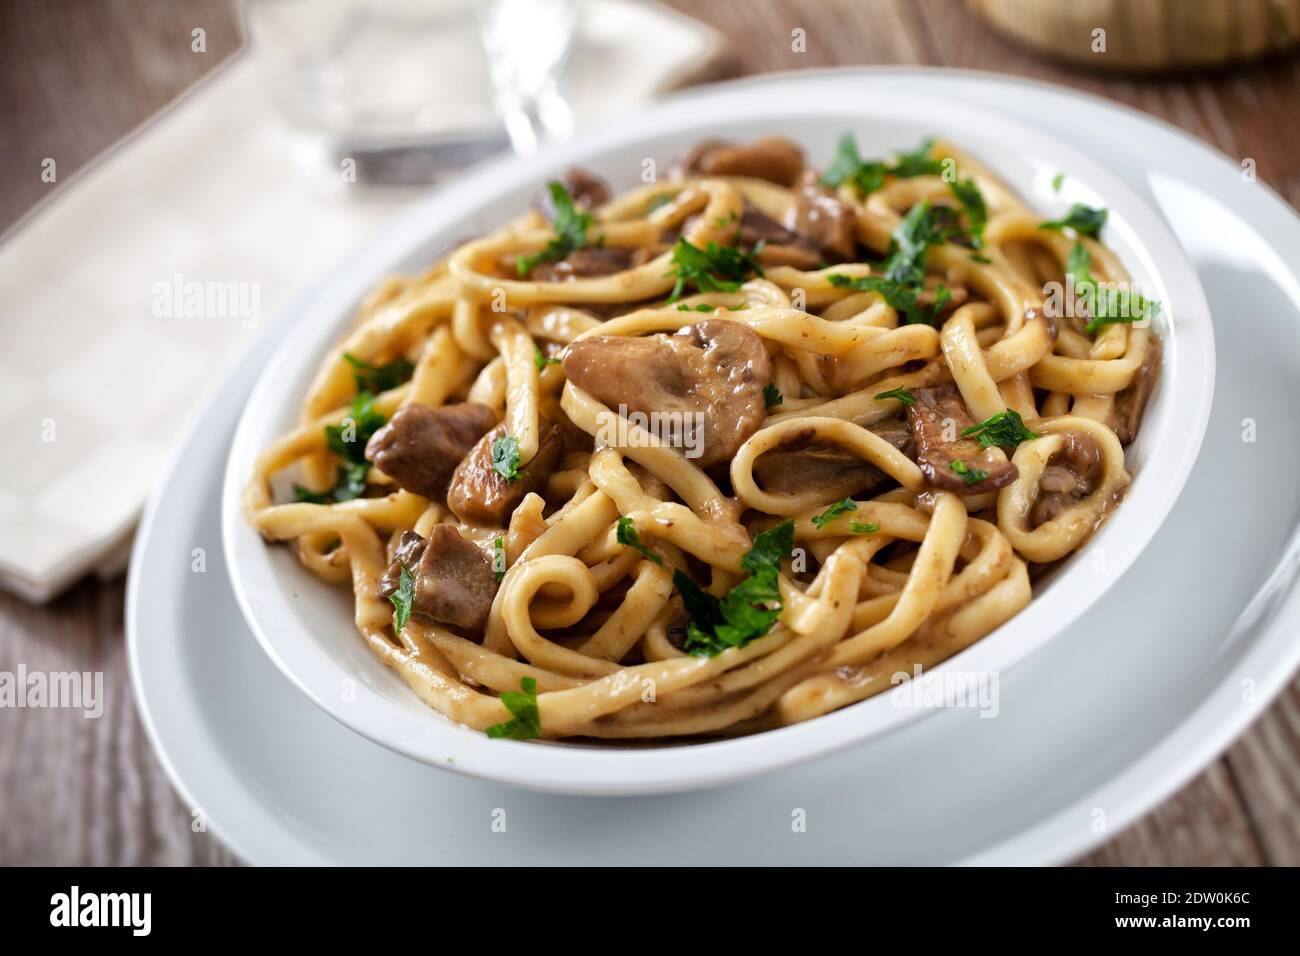 Tagliatelle with mushrooms on a plate. High quality photo. Stock Photo